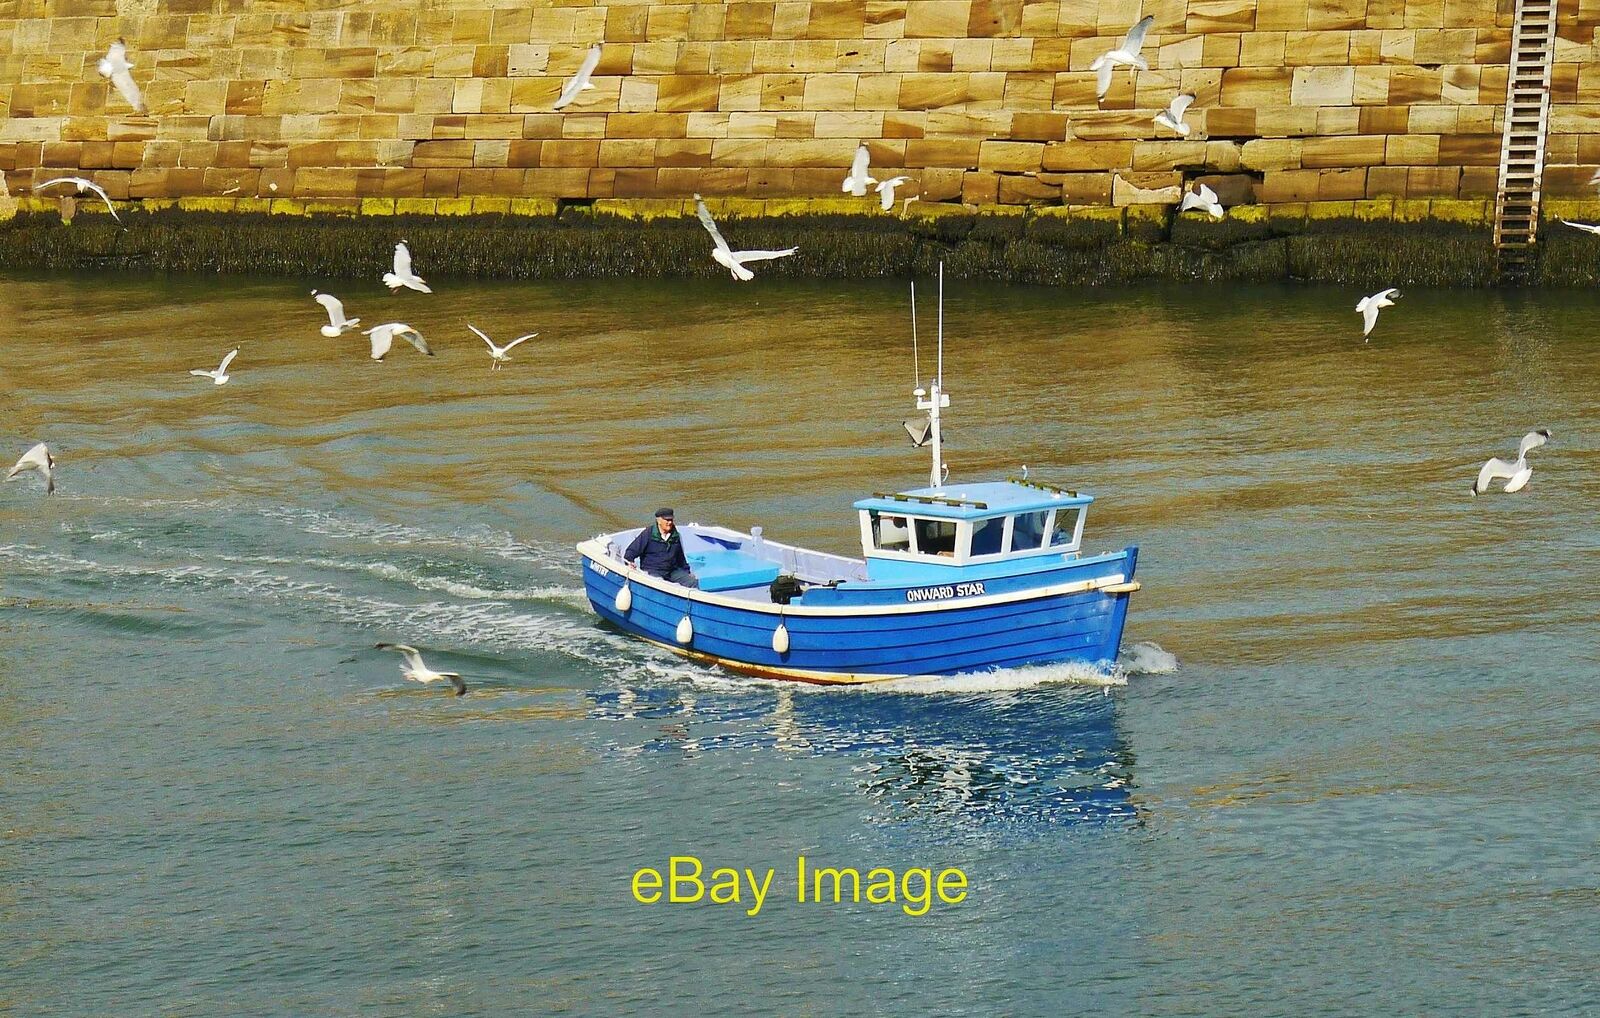 Photo 12x8 Returning to the harbour Small arrival at Whitby harbour. c2014